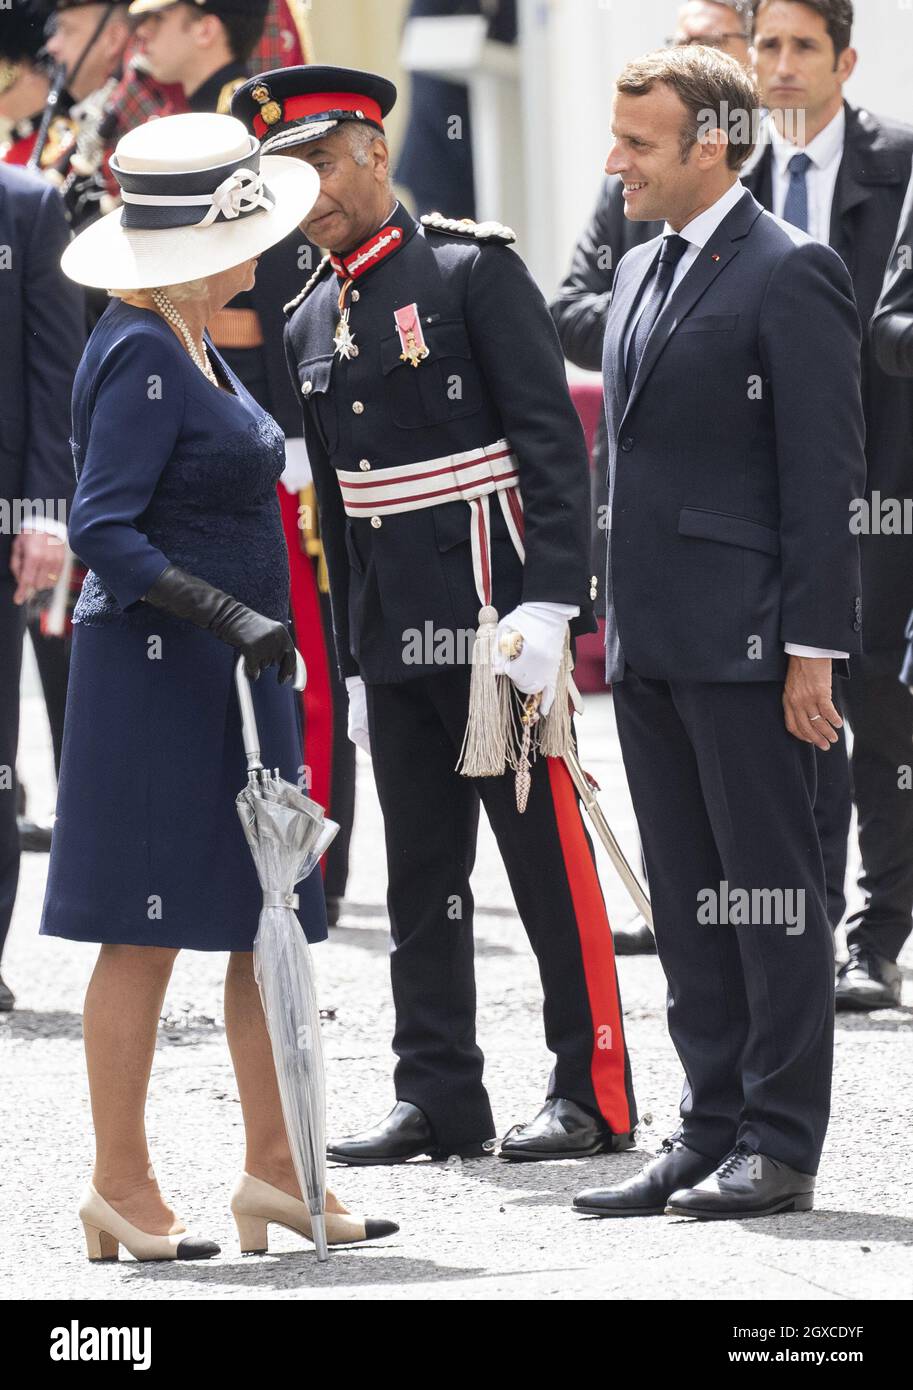 French President Emmanuel Macron meets Camilla, Duchess of Cornwall during a ceremony at Carlton Gardens. The French president is visiting London on June 18, 2020 to commemorate the 80th anniversary of Charles de Gaulle's BBC broadcast to occupied France following the Nazi invasion in 1940 'Appel' . Stock Photo